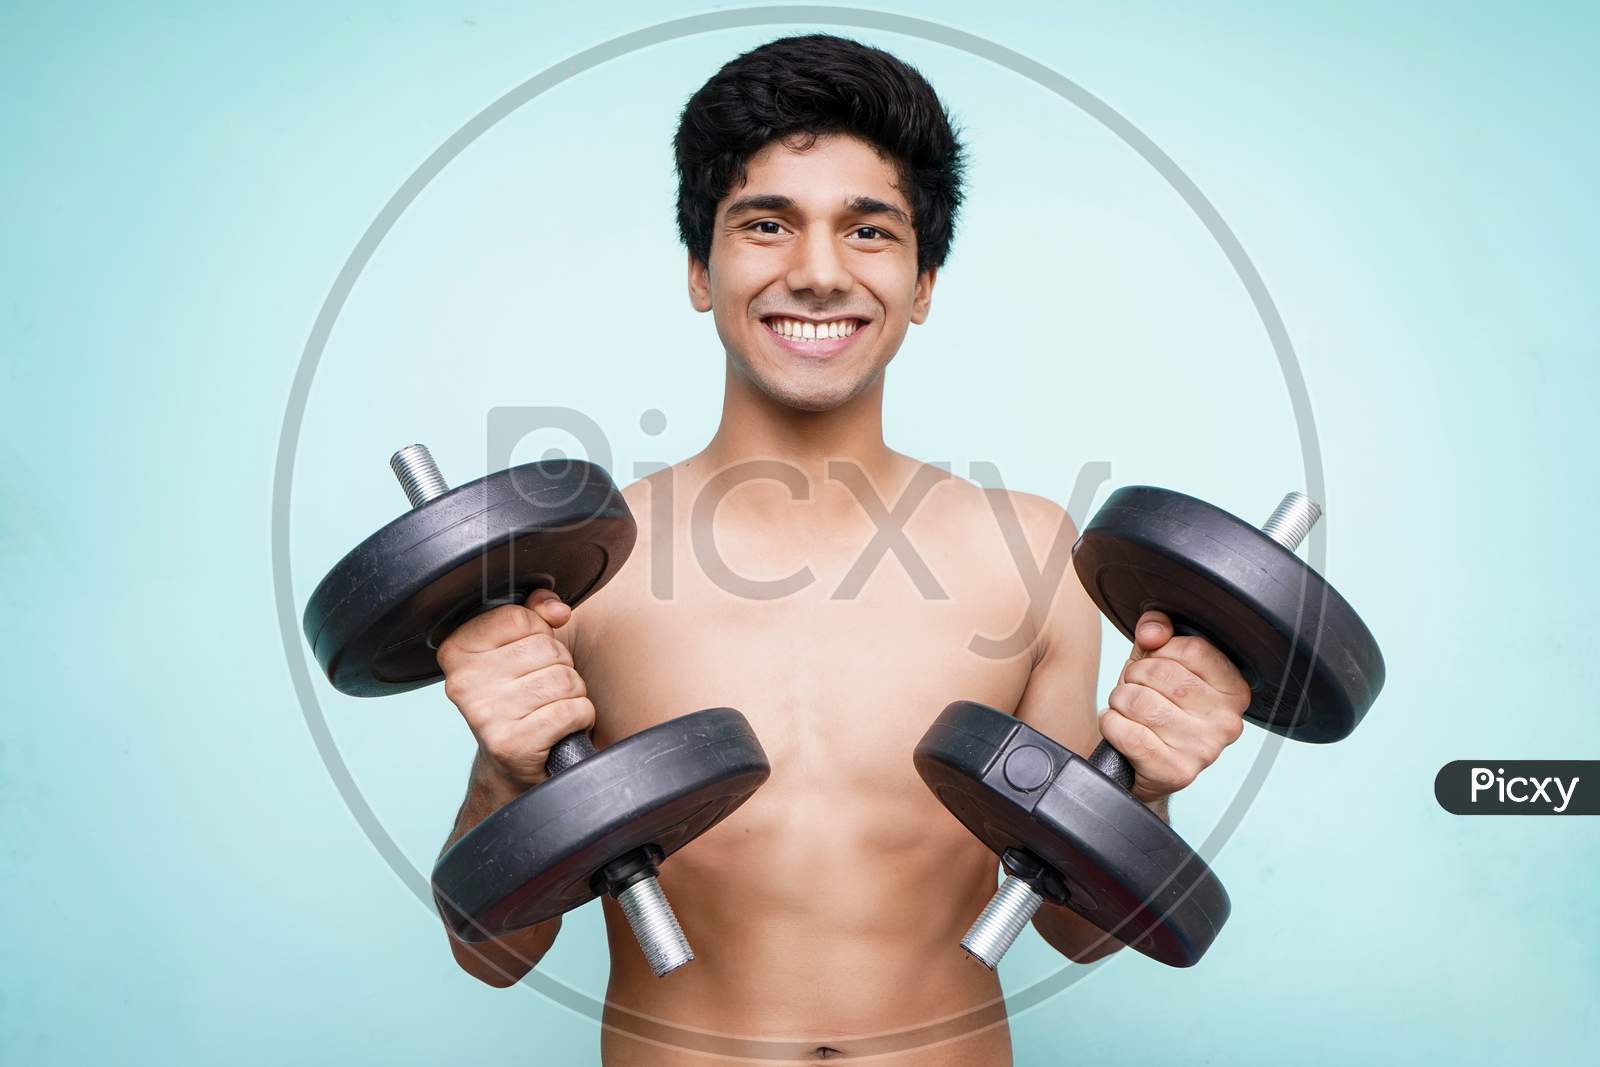 Young Handsome Asian Boy Holding Dumbbells On Both The Hands Looking Into The Camera While Smiling. Standing In Front Of A Blue Wall.